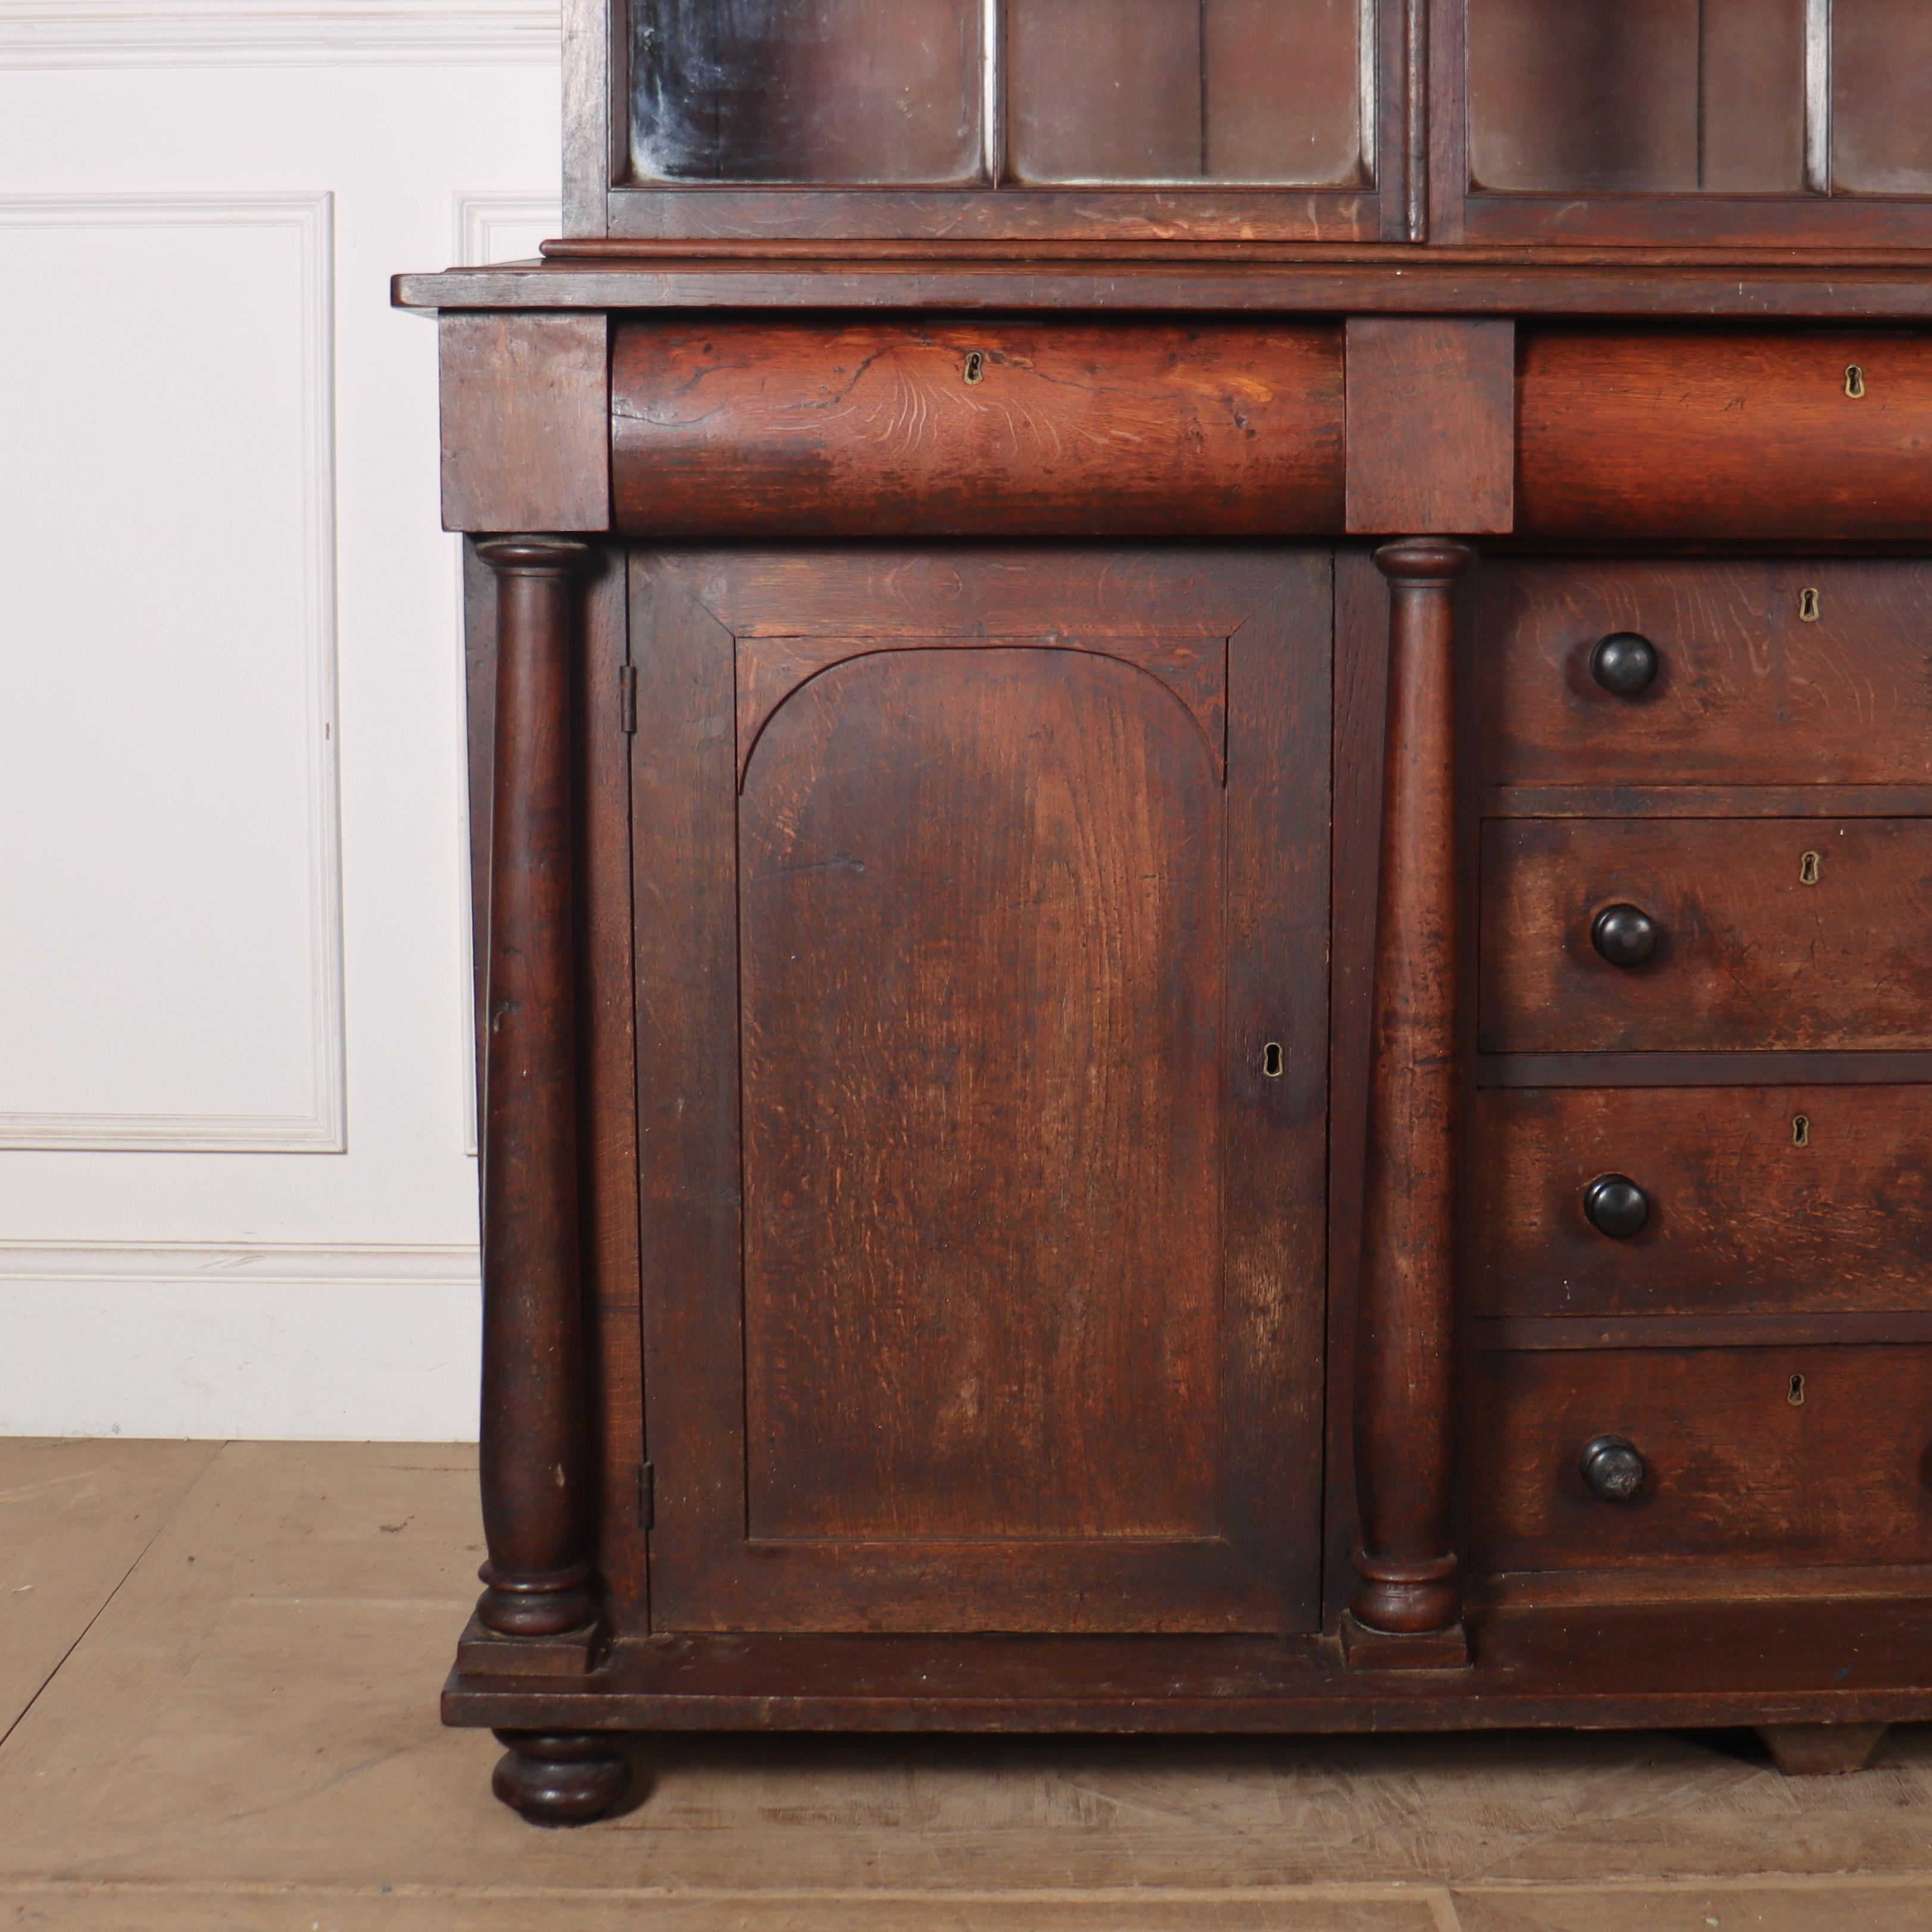 Stunning Cornish oak glazed dresser. All original, wonderful colour. 1830.

Reference: 8268

Dimensions
68 inches (173 cms) Wide
20 inches (51 cms) Deep
80 inches (203 cms) High